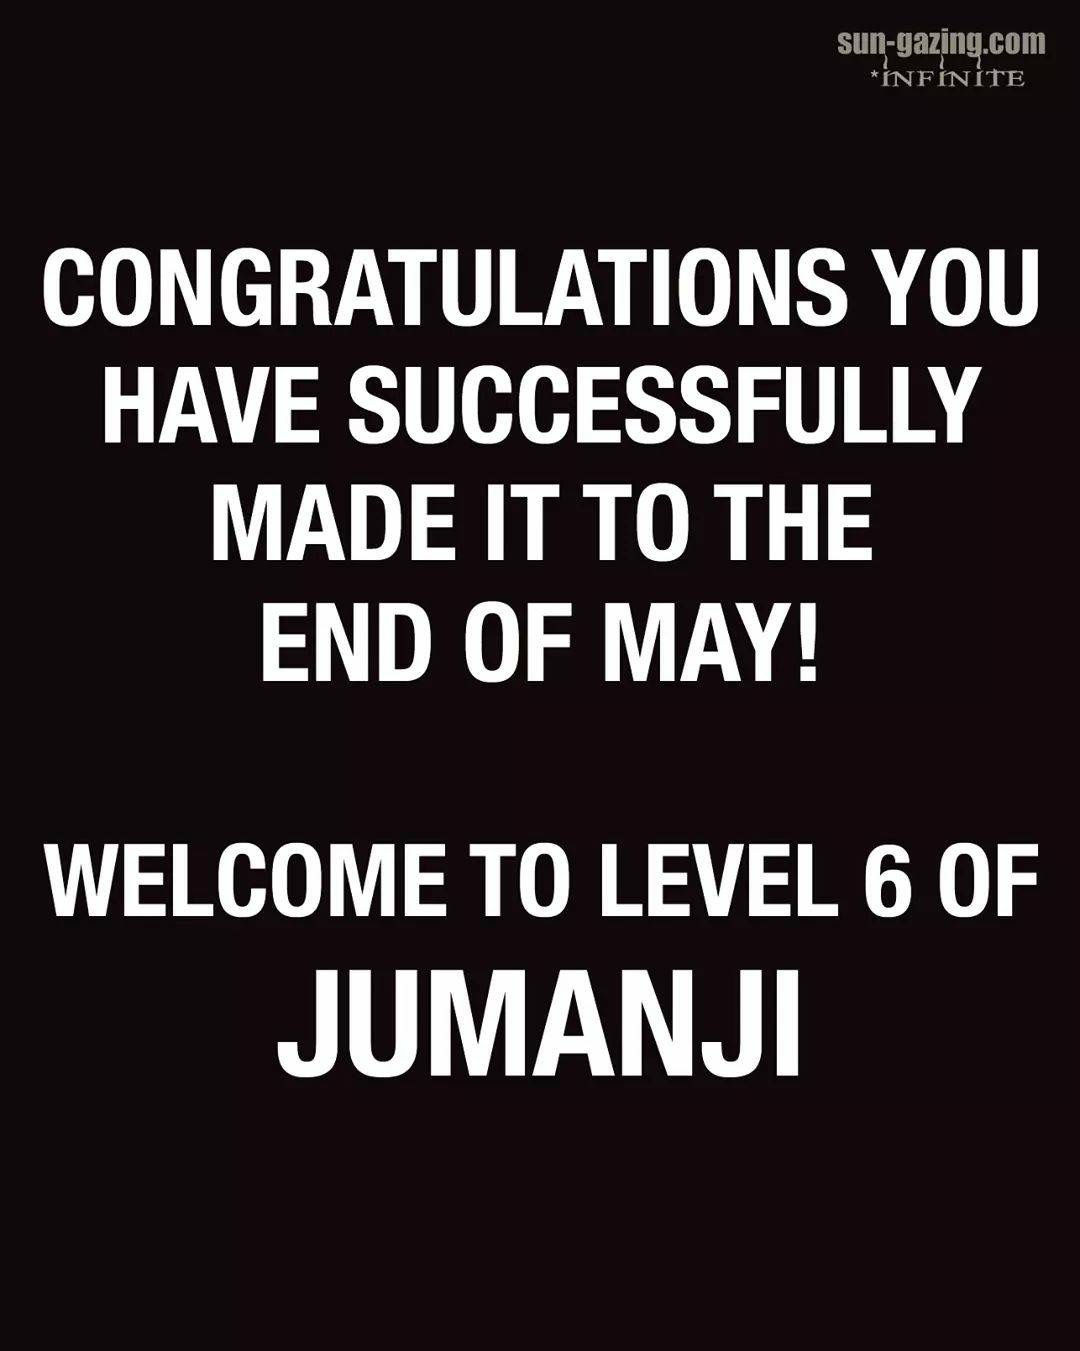 angle - sungazing.com Infinite Congratulations You Have Successfully Made It To The End Of May! Welcome To Level 6 Of Jumanji